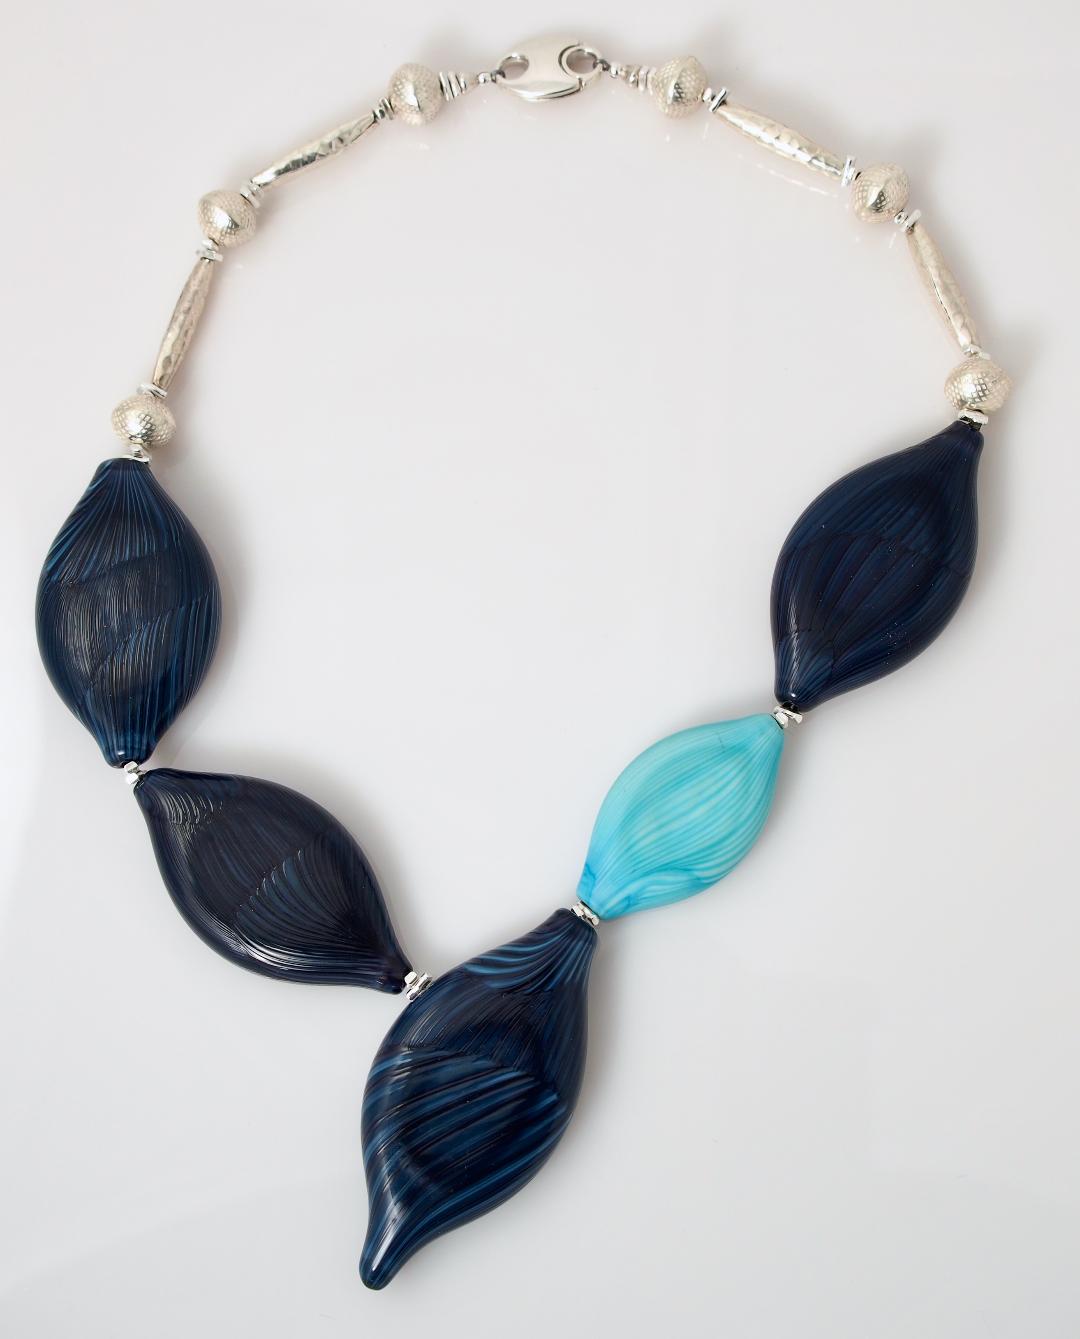 Off Balance in Shades of Blue Necklace